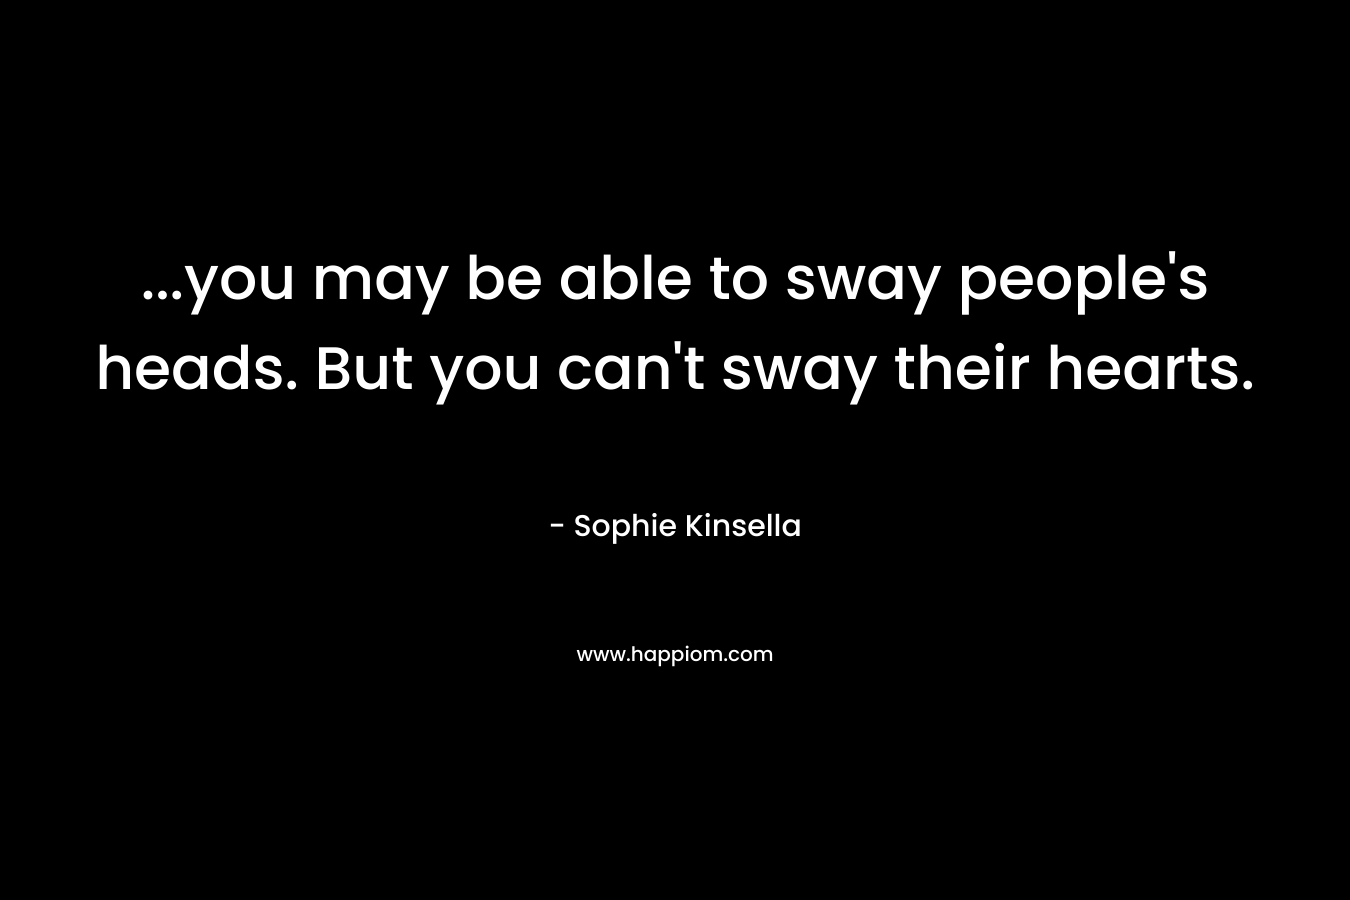 …you may be able to sway people’s heads. But you can’t sway their hearts. – Sophie Kinsella